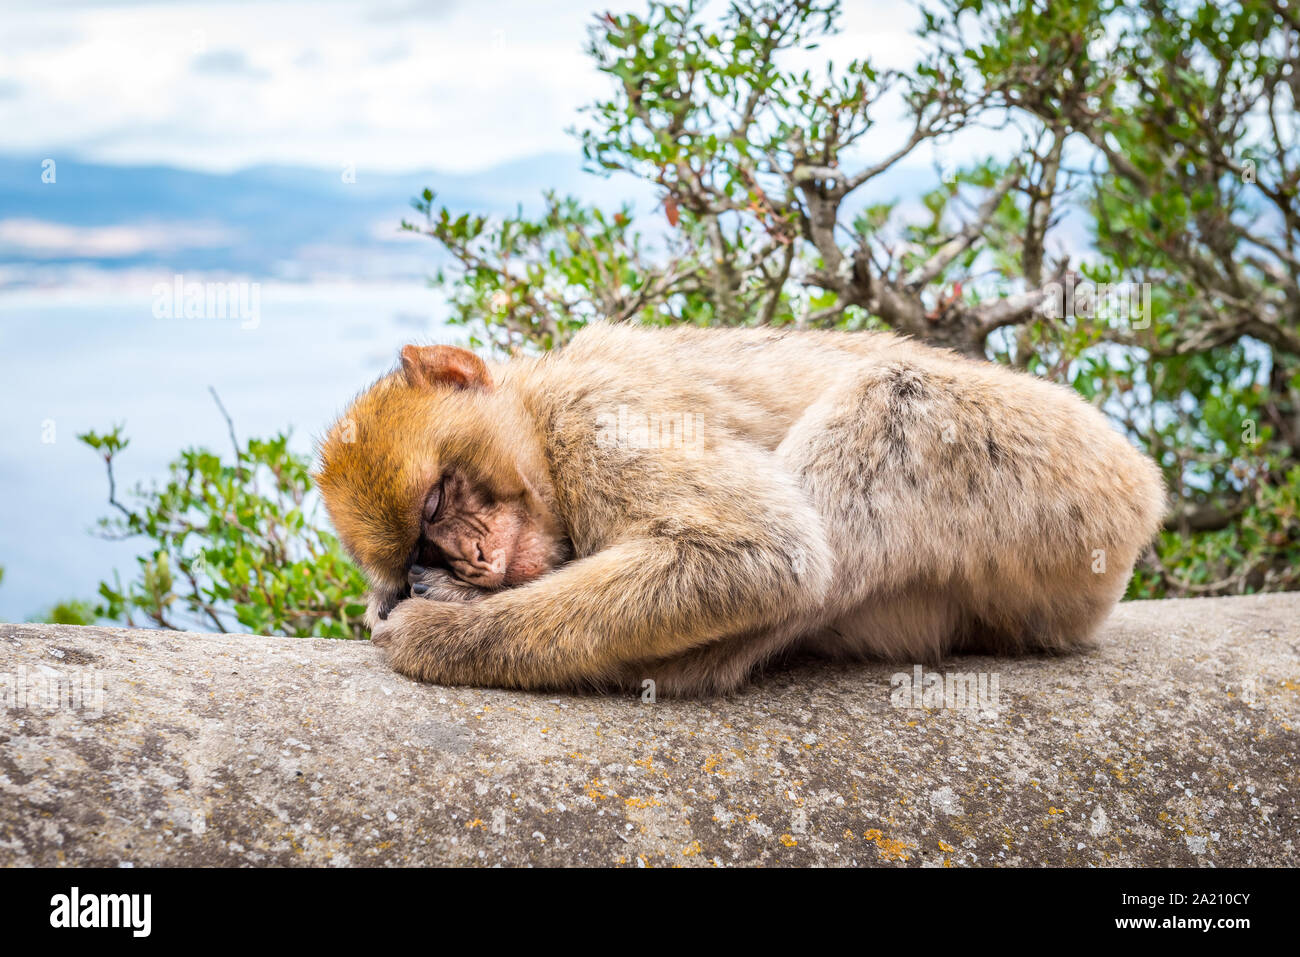 Wild Barbary Macaques (Macaca sylvanus) on the Rock of Gibraltar.  A tourist highlight, you can get close to these monkeys in their natural habitat. Stock Photo